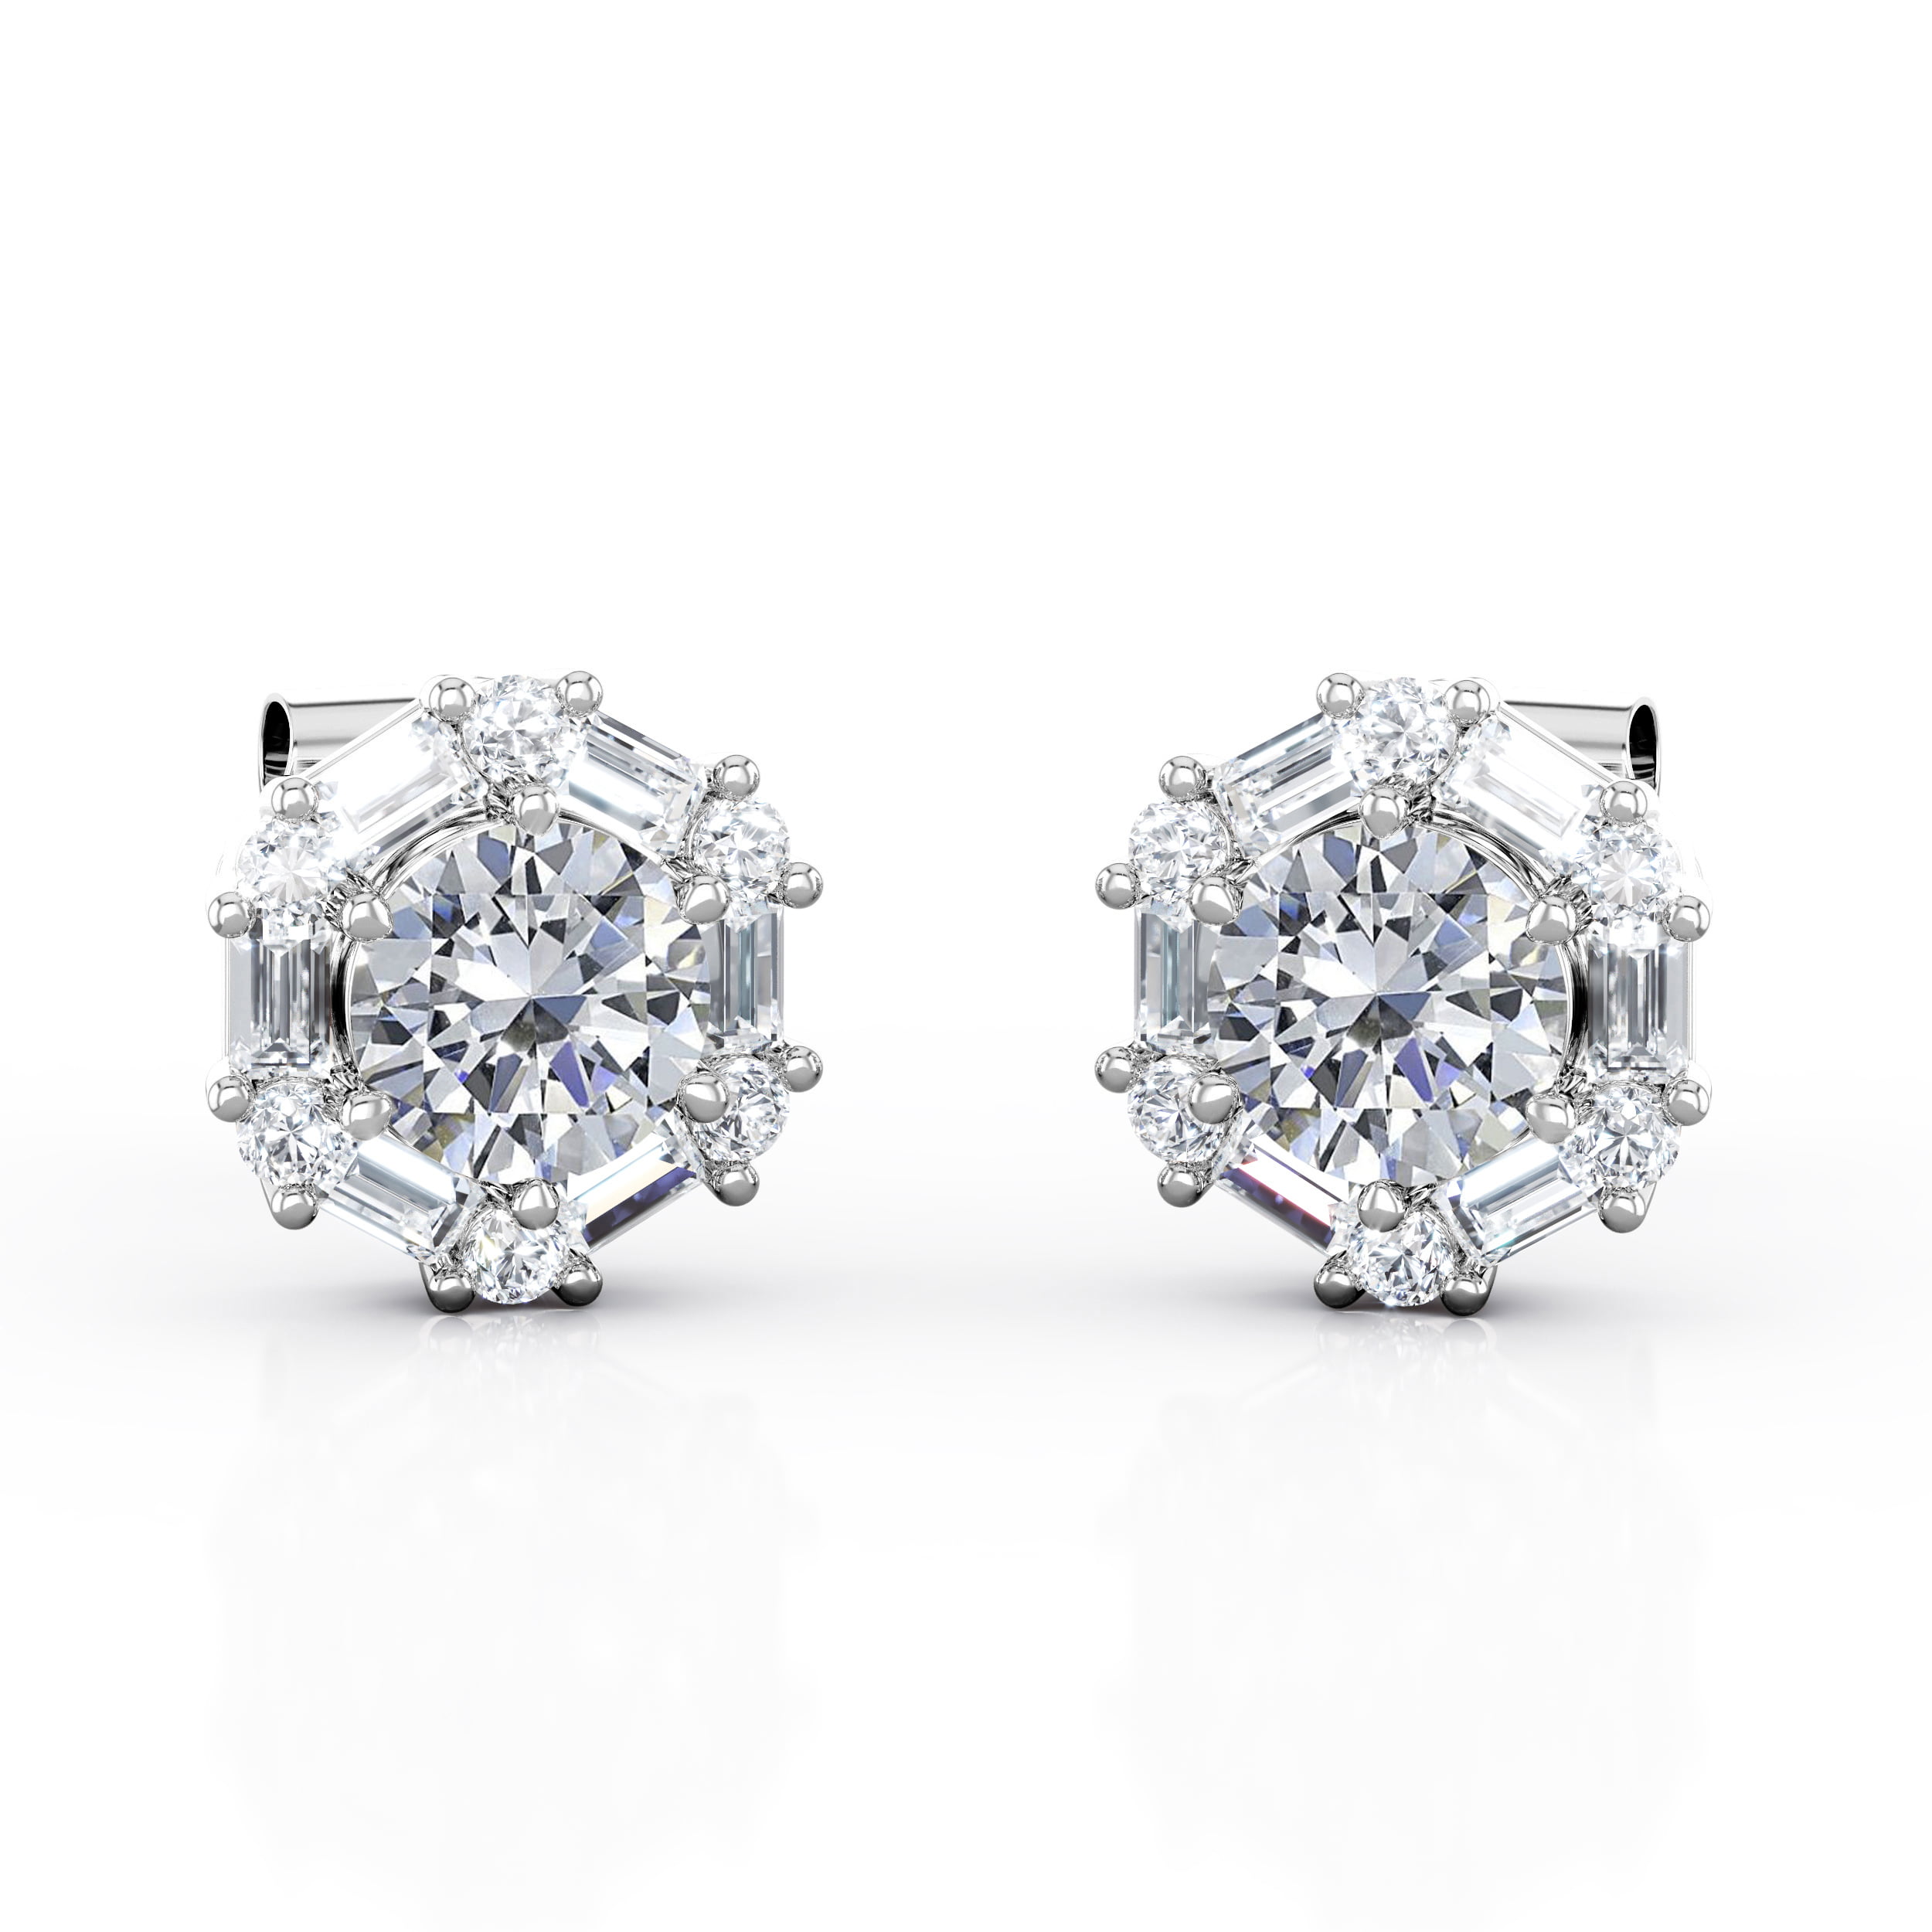 1.5 Ct Round Cut Moissanite Crown Stud Earrings 14K White Gold Filled Jewelry